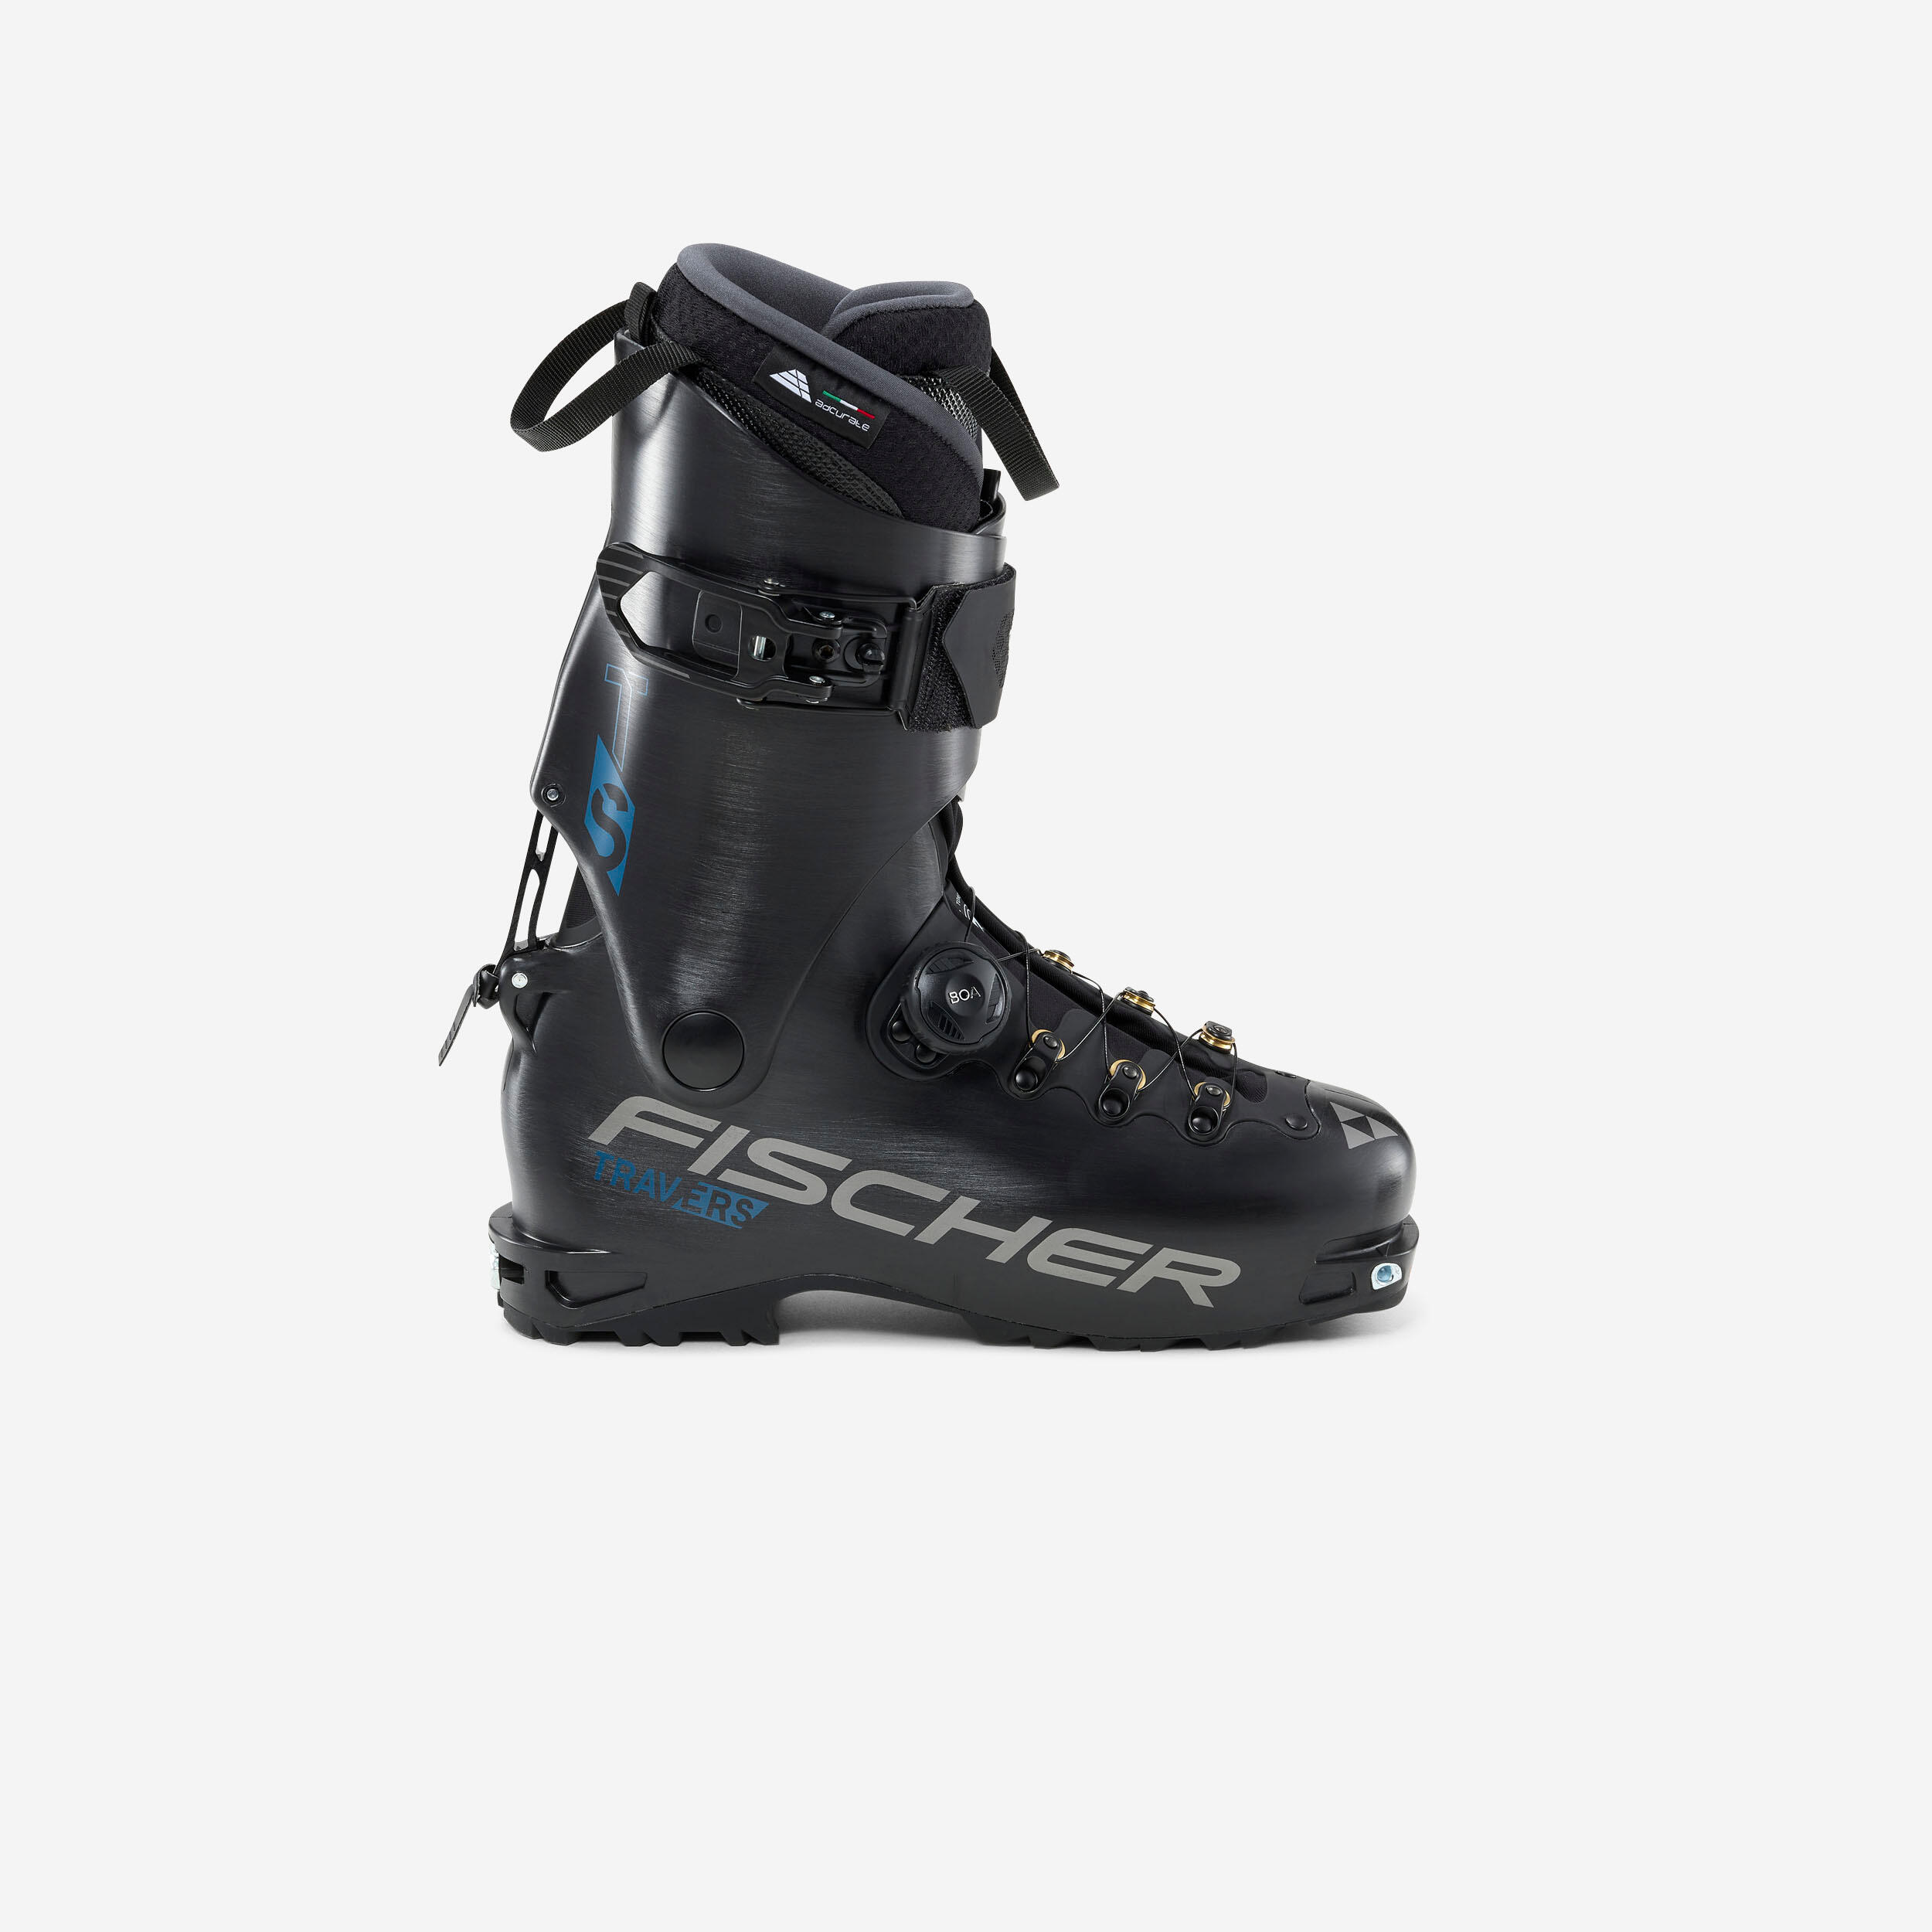 ADULT SKI TOURING BOOTS - FISCHER TRAVERS TS 2/10